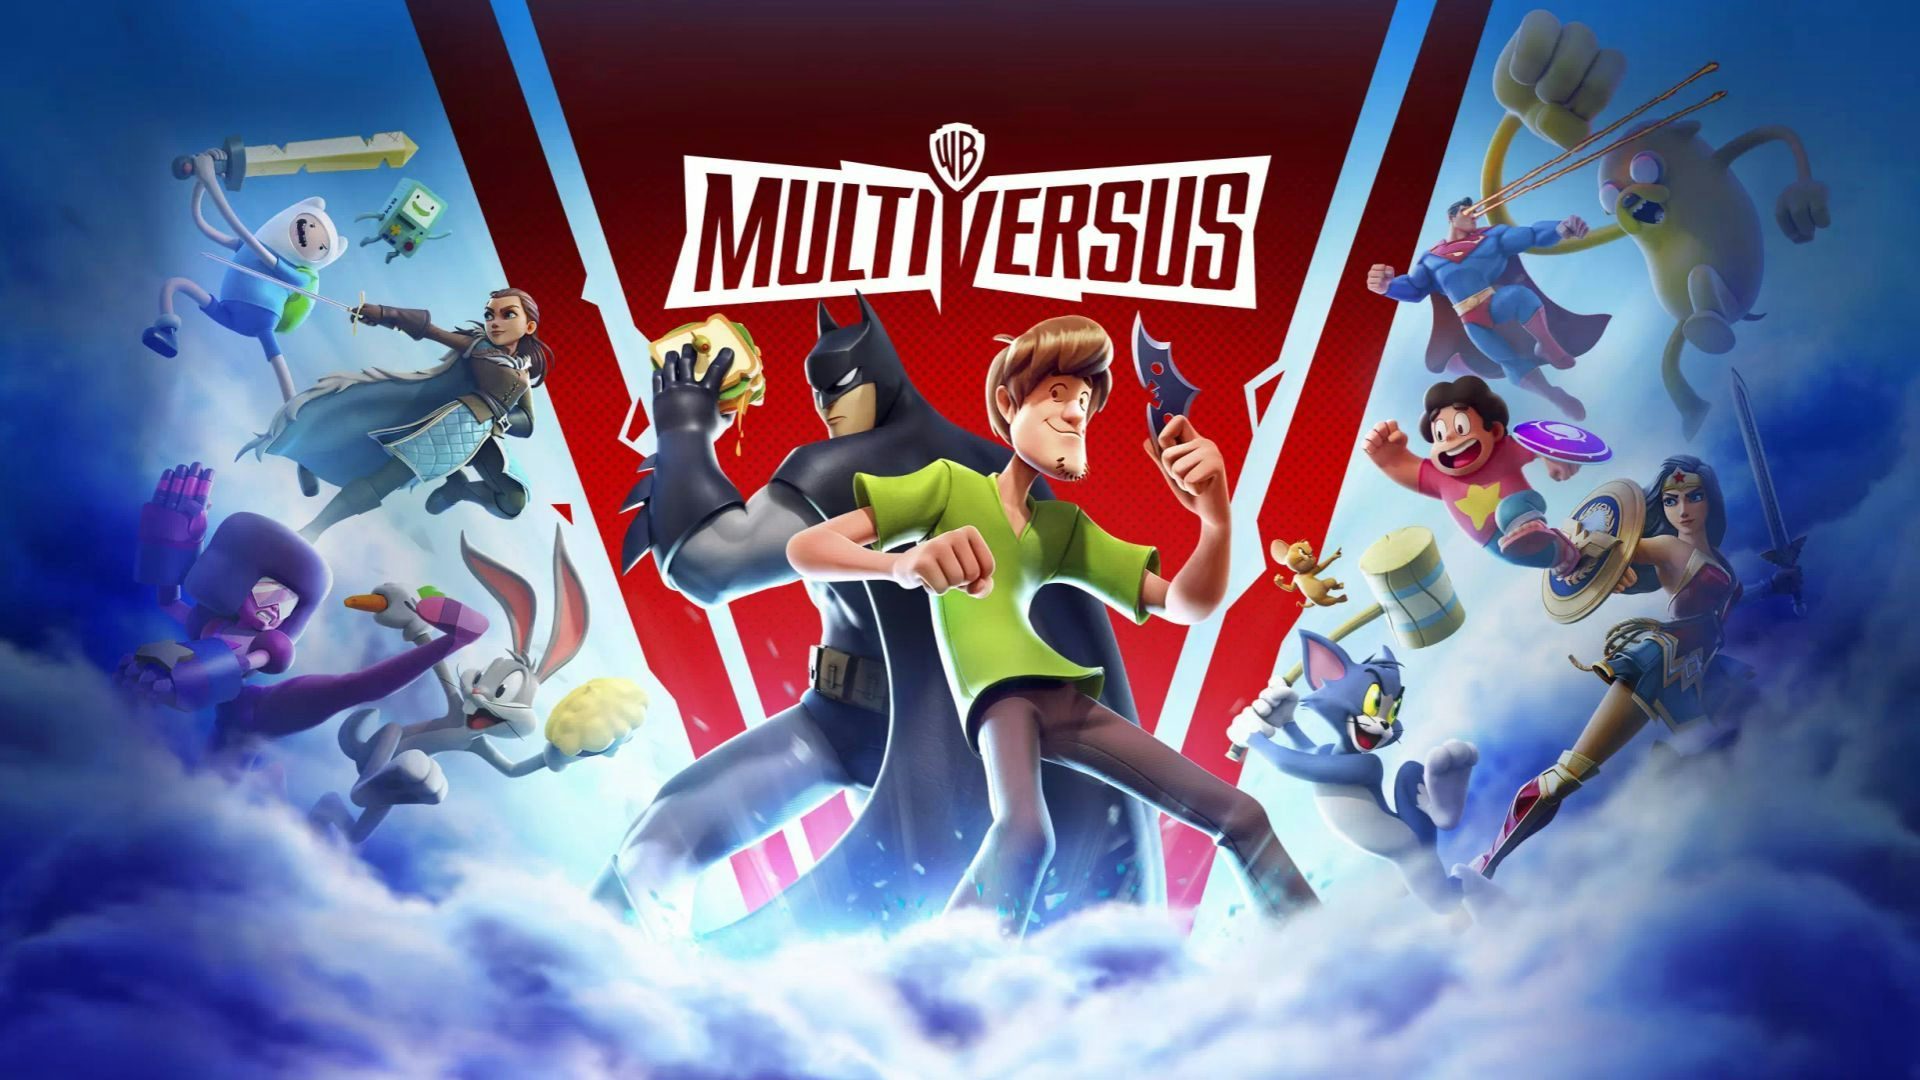 Give us a hot take on any of MultiVersus's characters!